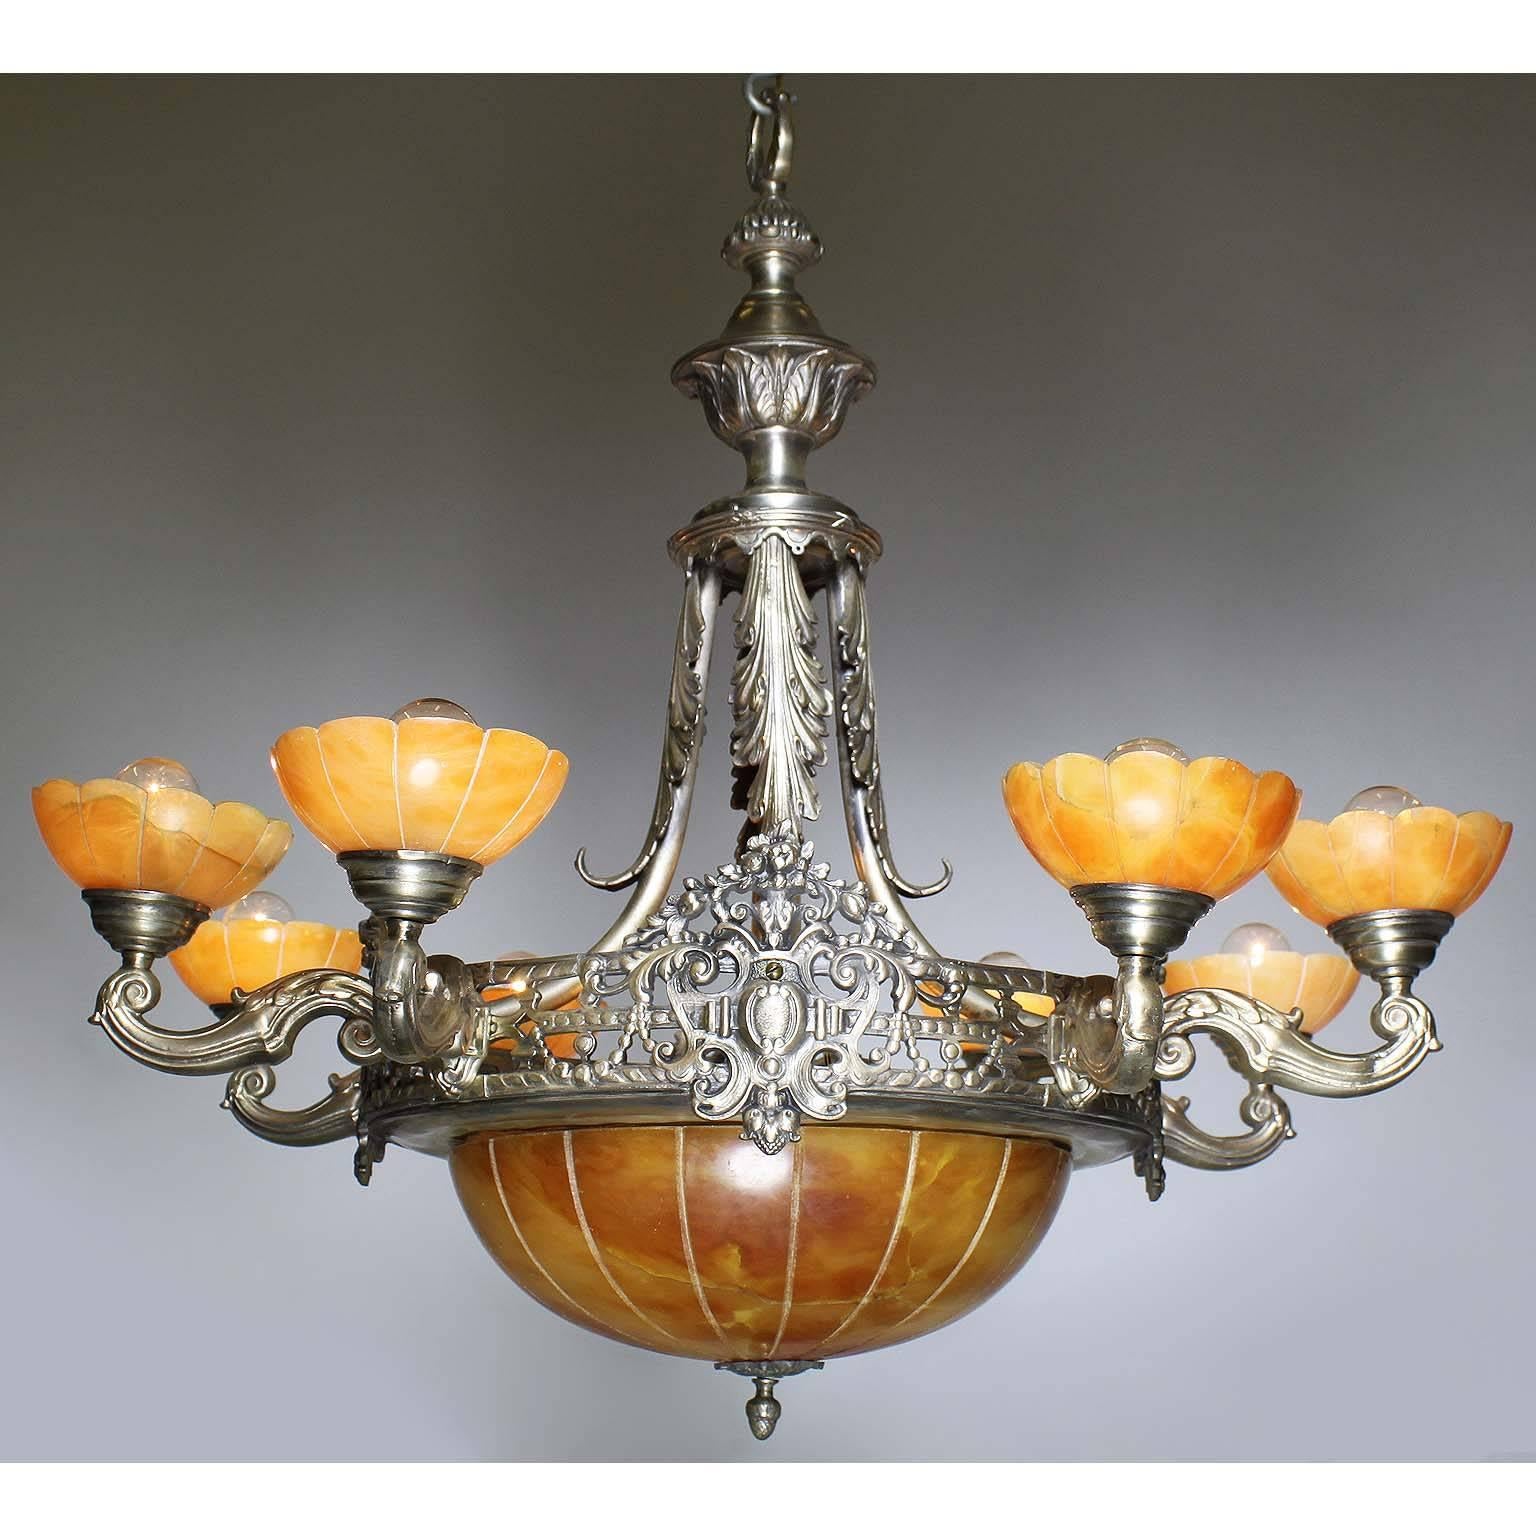 A French early 20th century Art Deco silvered bronze and carved caramel-color alabaster eight-light chandelier. The pierced silver plated bronze frame, suspended by four scrolled braces with acanthus decorations, surmounted by eight scrolled shaped